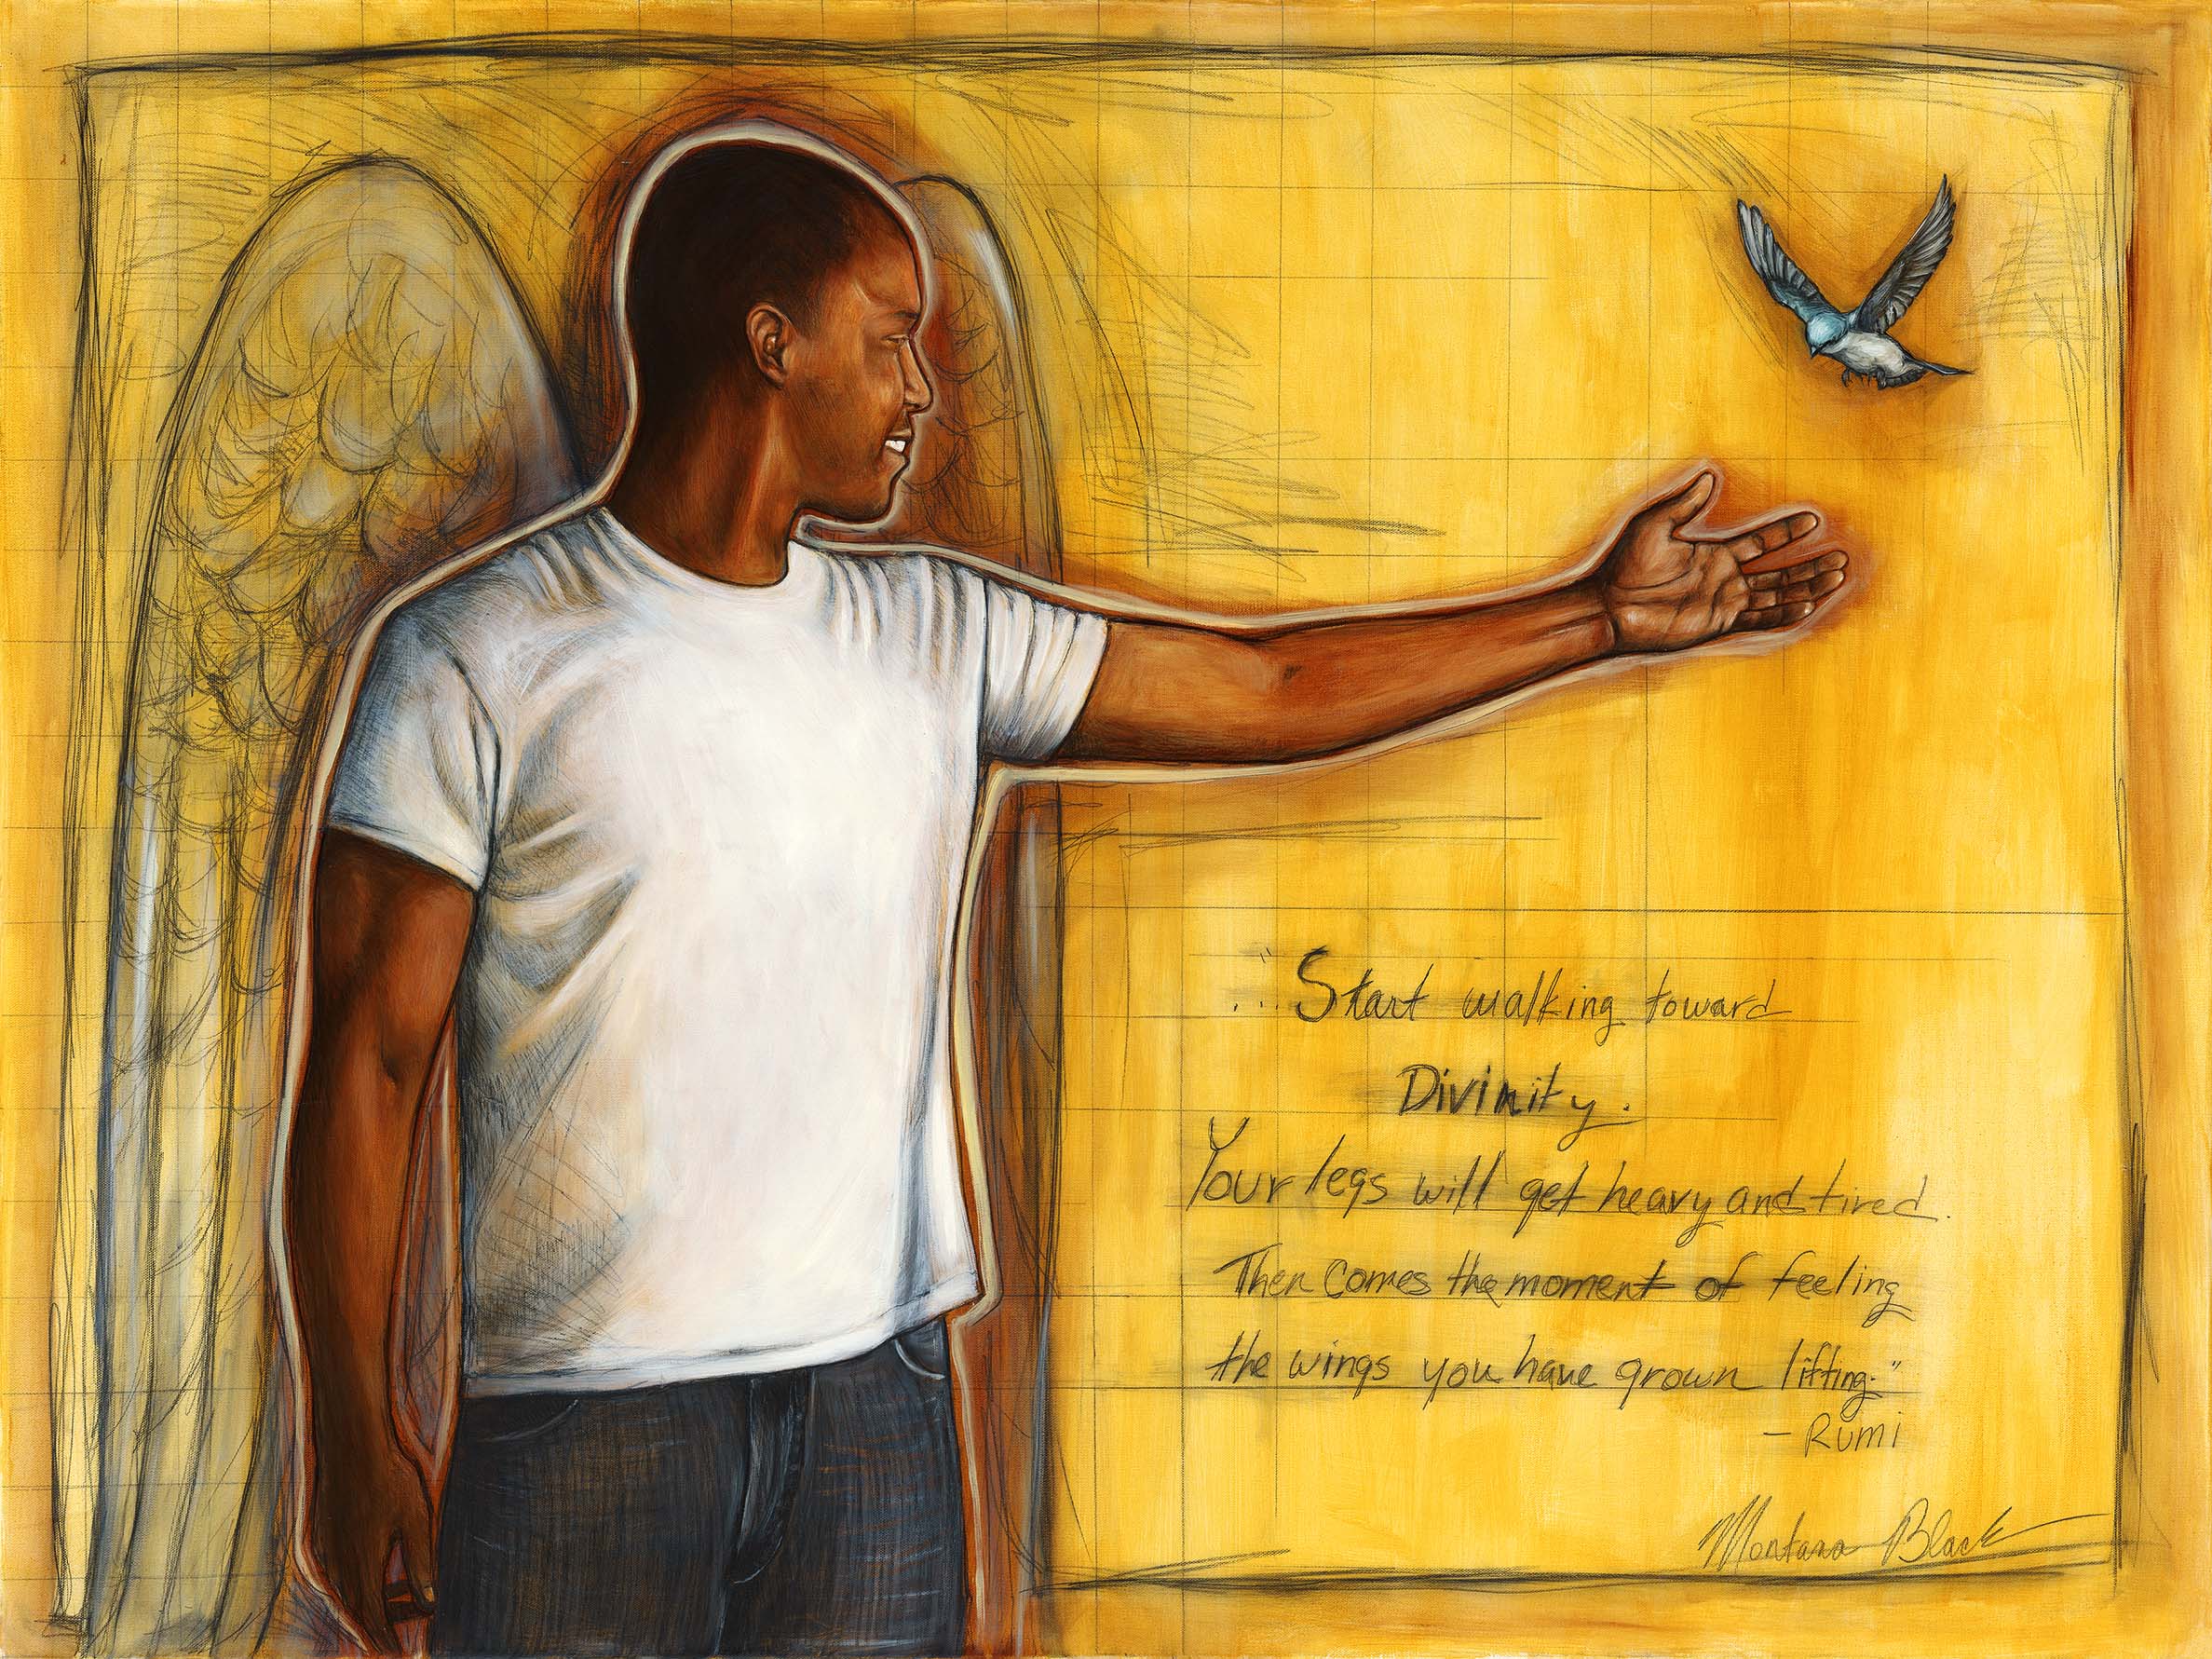 Painting of a young man welcoming a blue bird to land on his hand.